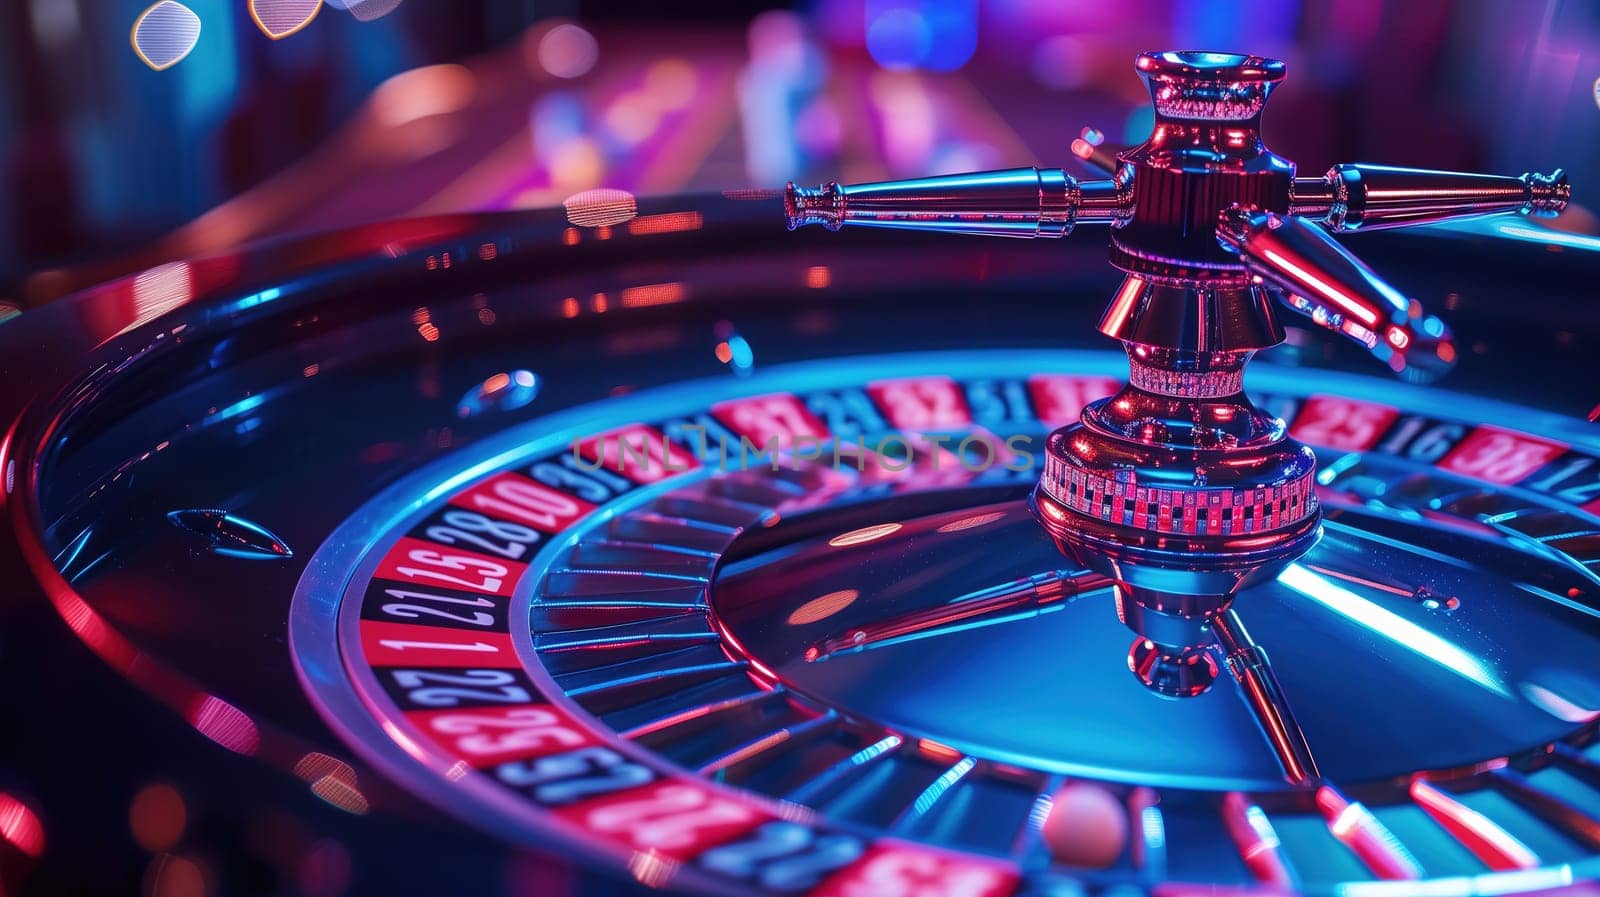 Illuminated Roulette Wheel Close-Up in a Casino Setting at Night by TRMK